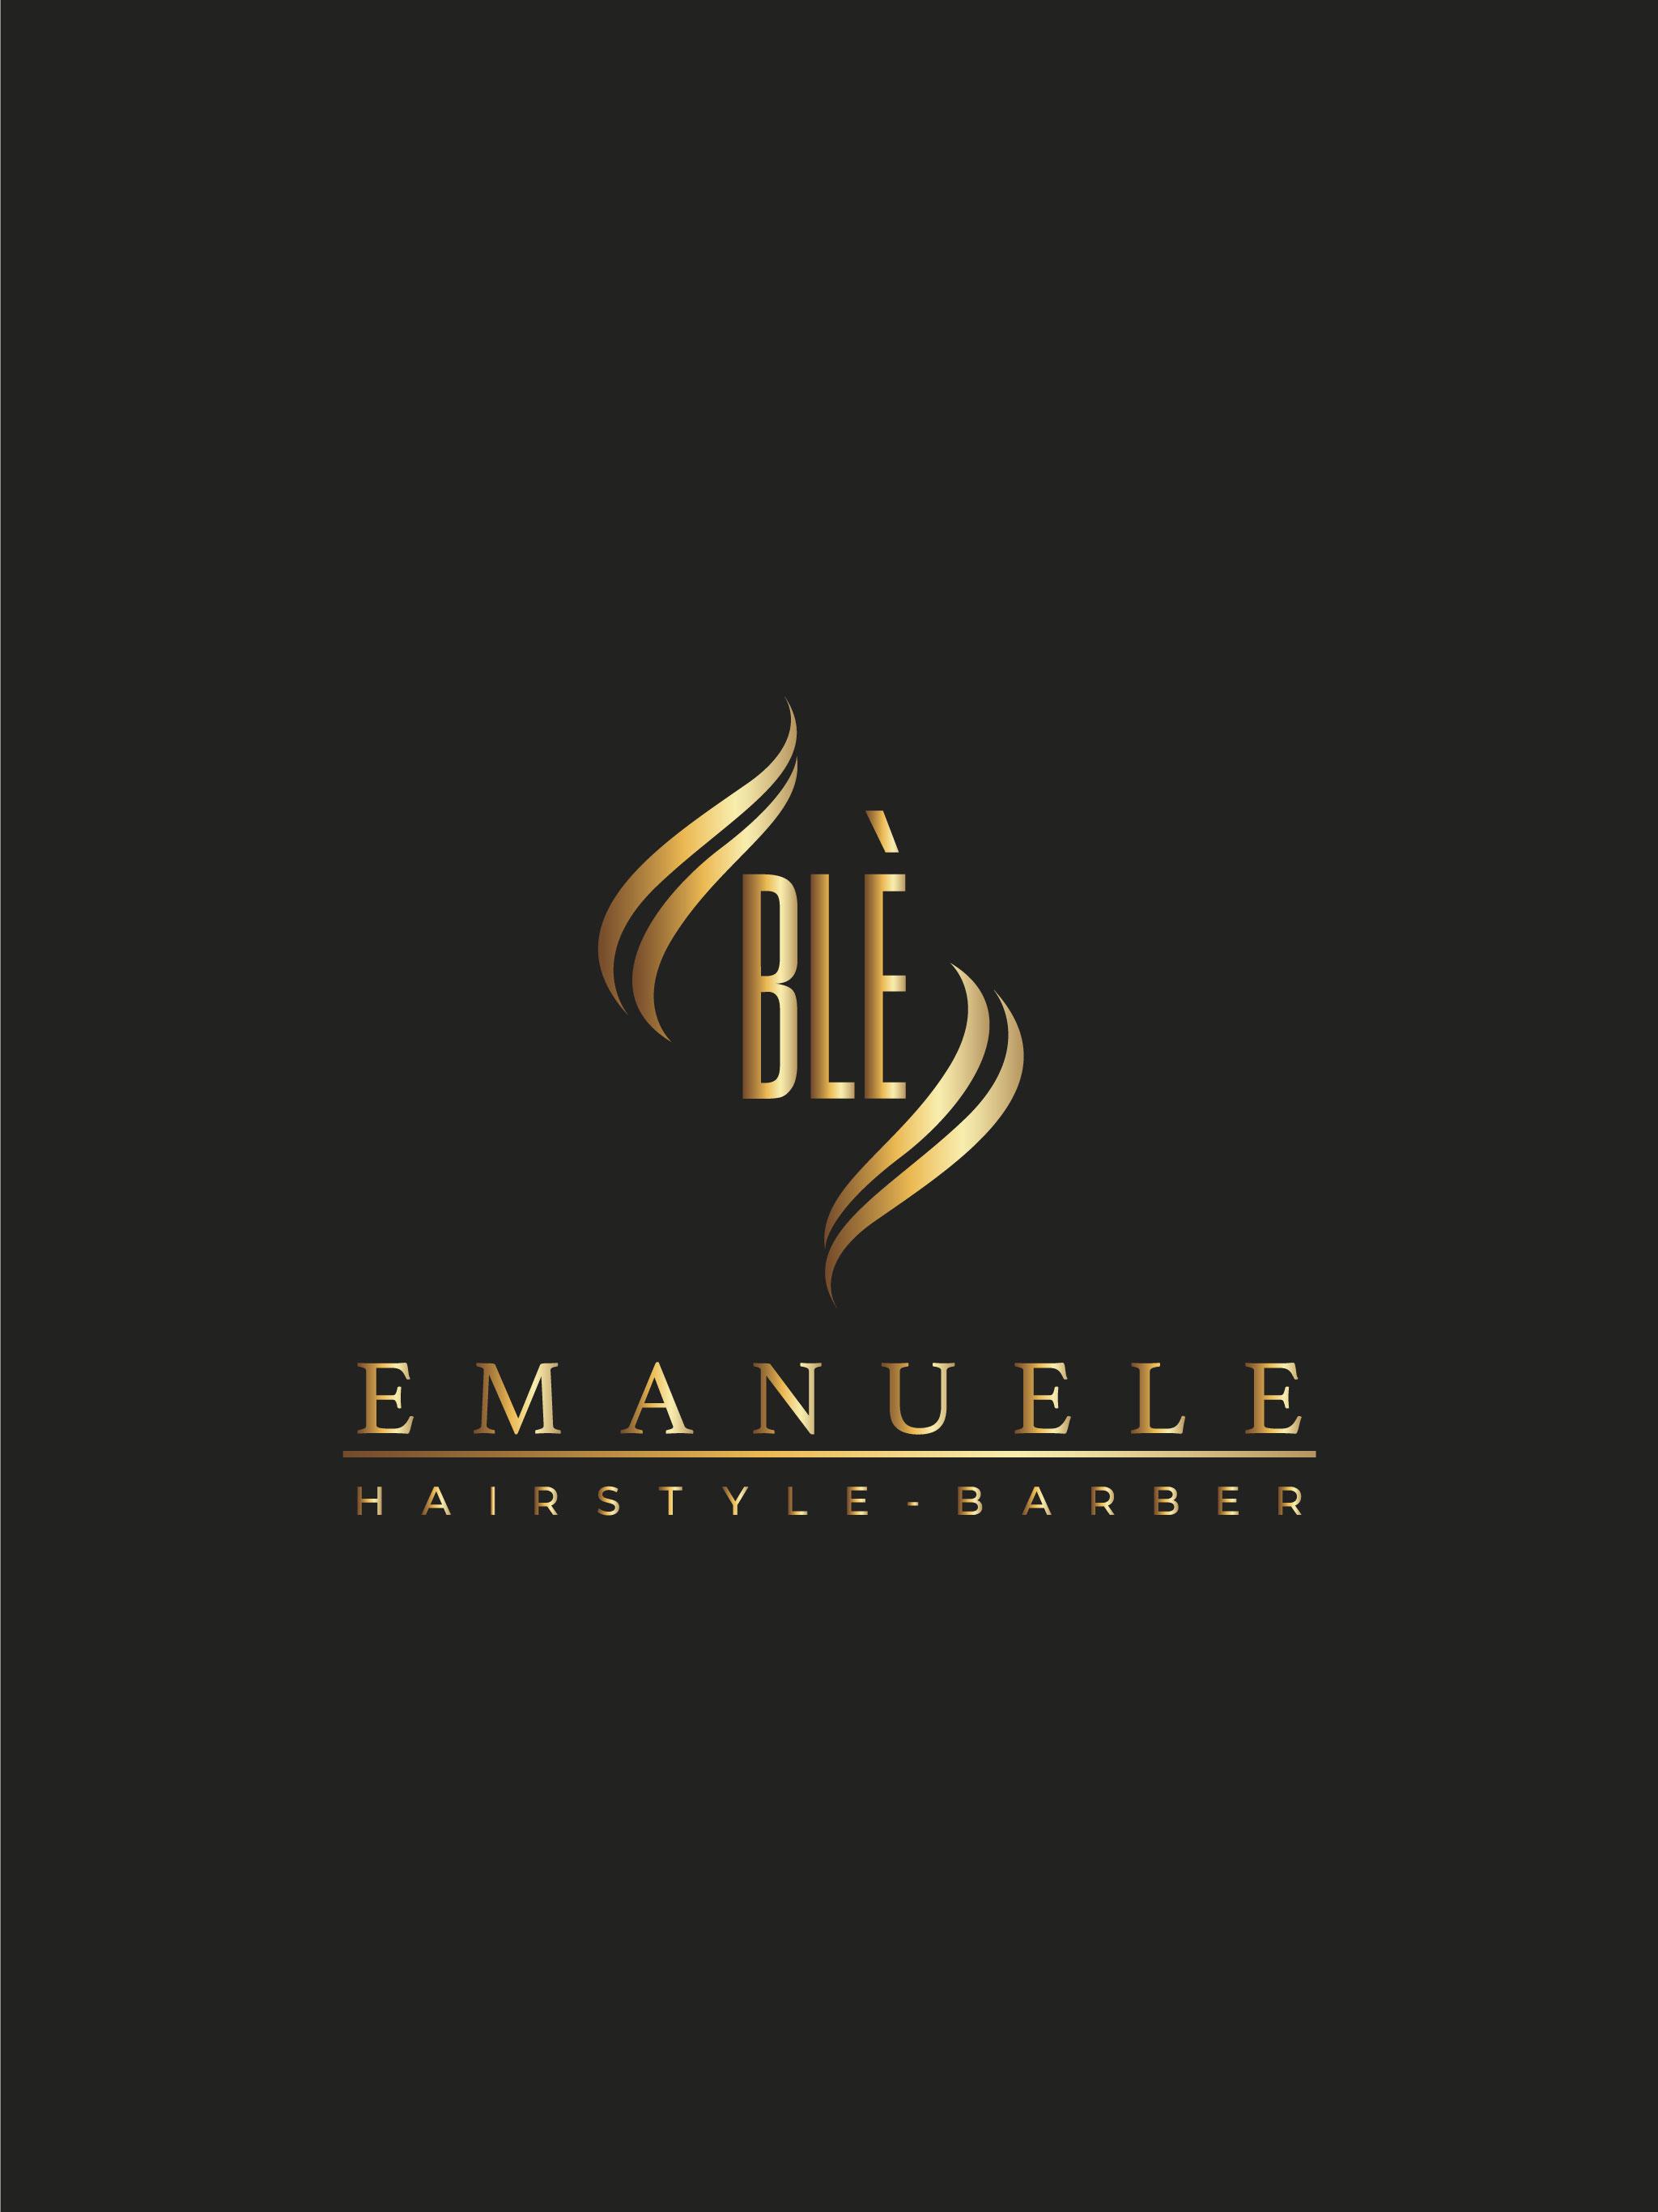 Blè Hairstyle Barber for Android - APK Download